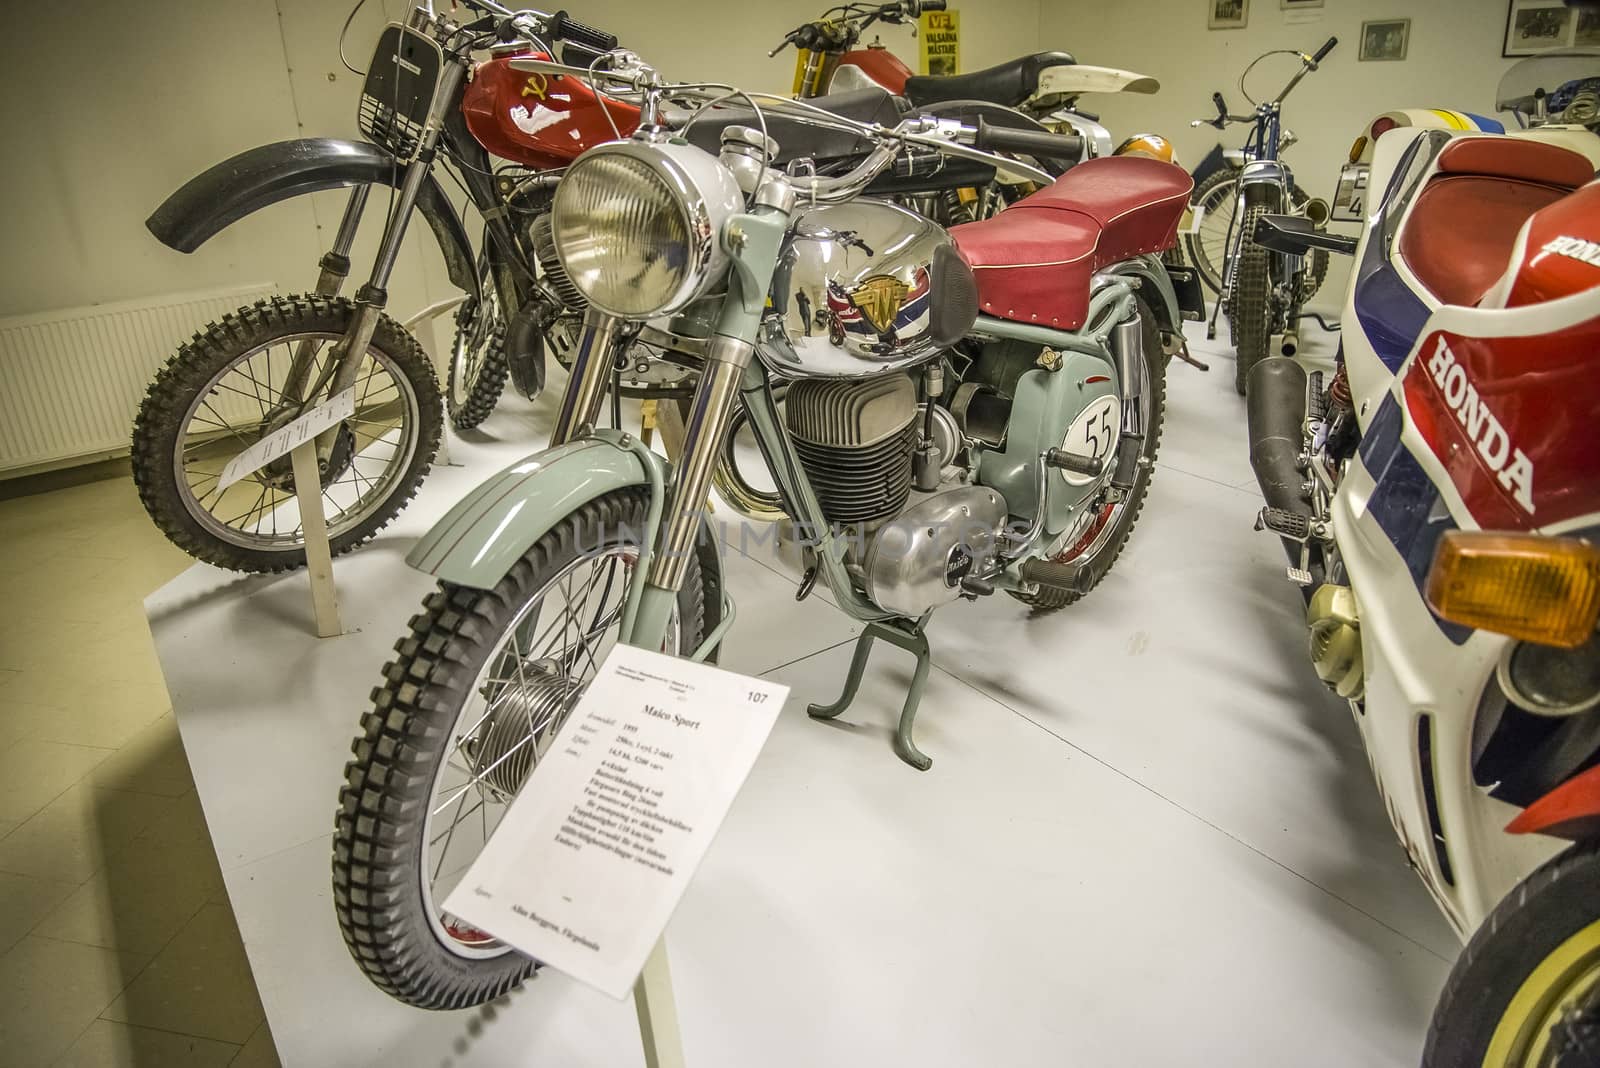 1955 Maico Sport, Germany. Engine: 250cc 1 cyl, 2-stroke, 14.5 hp, 5200 rpm, 4 gear. Top speed 110 km / per hour. All the pictures are shot on Ed's motorcycle and Motor Museum in Ed, Sweden. Interesting museum, which is worth a visit.